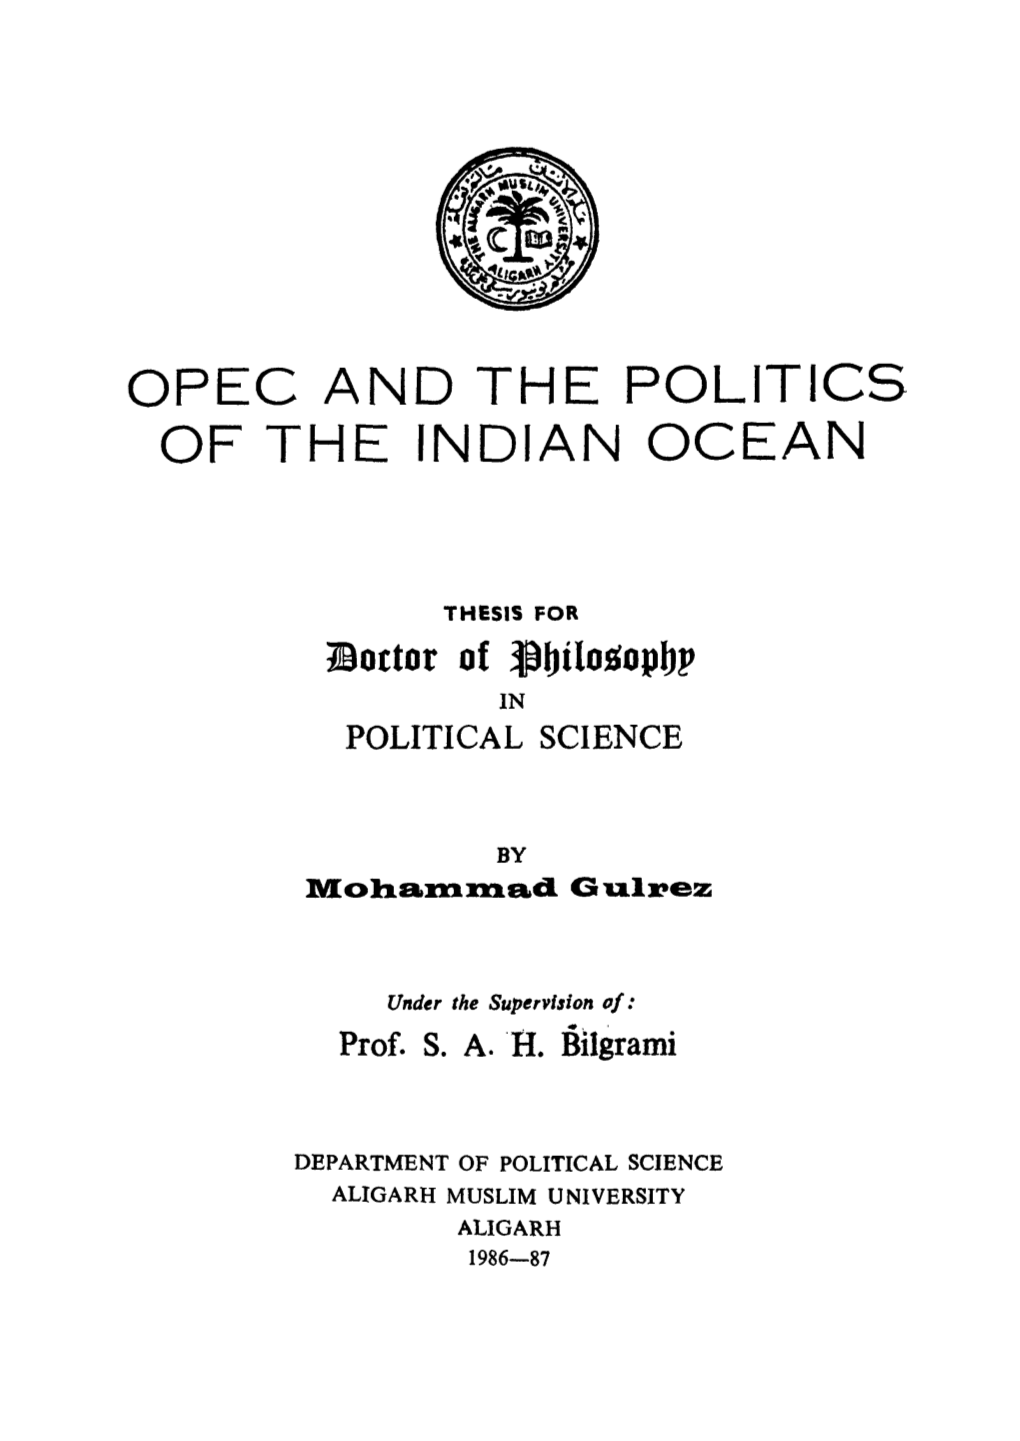 Opec and the Politics of the Indian Ocean